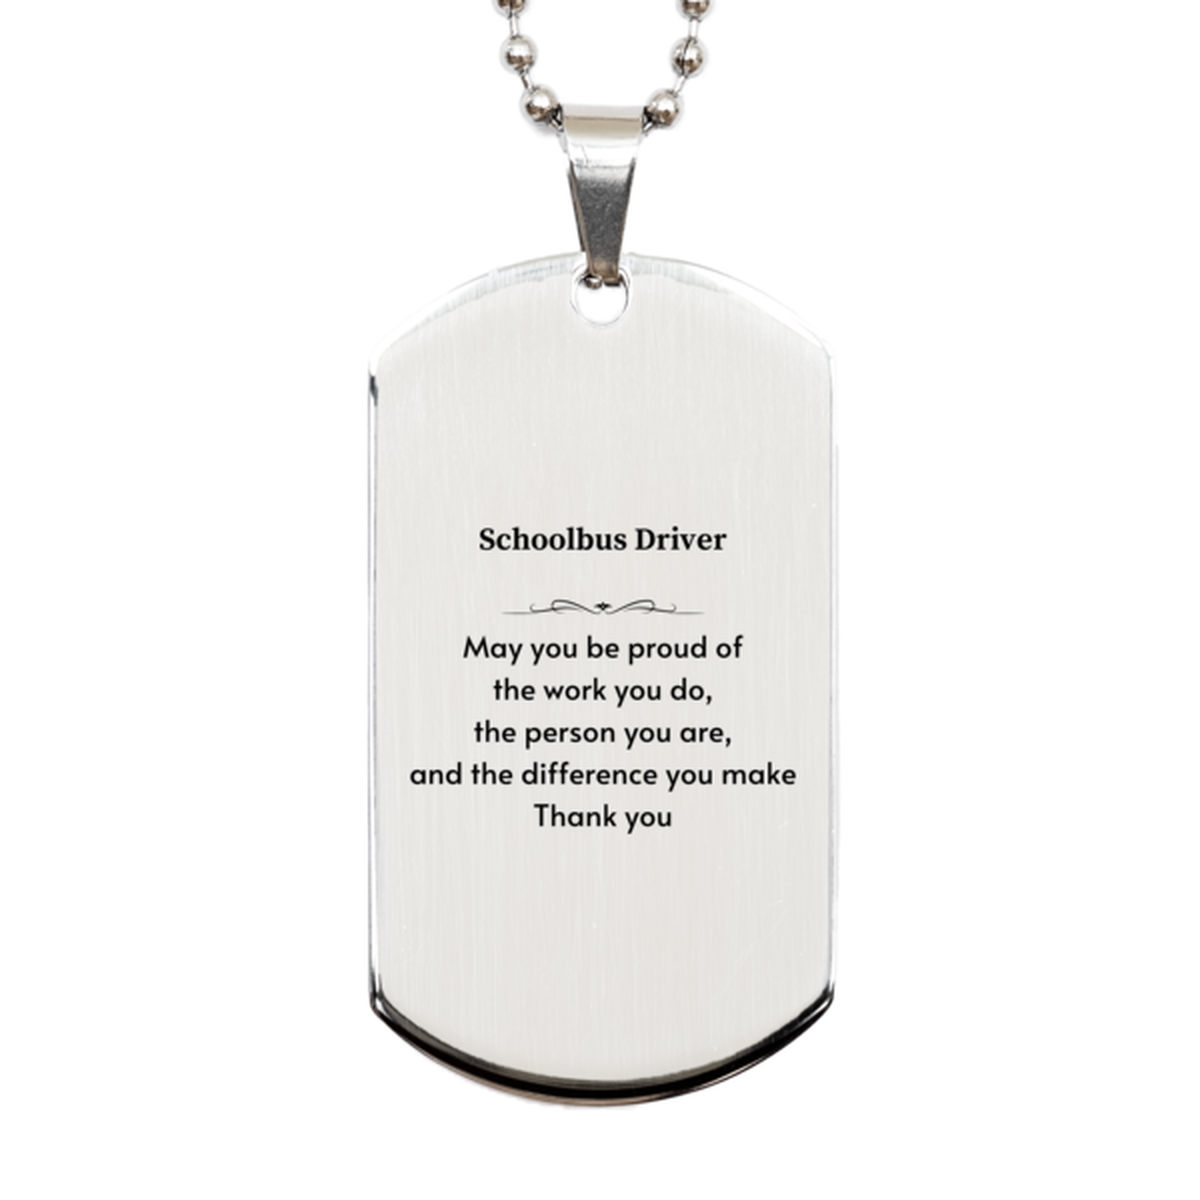 Heartwarming Silver Dog Tag Retirement Coworkers Gifts for Schoolbus Driver, Schoolbus Driver May You be proud of the work you do, the person you are Gifts for Boss Men Women Friends